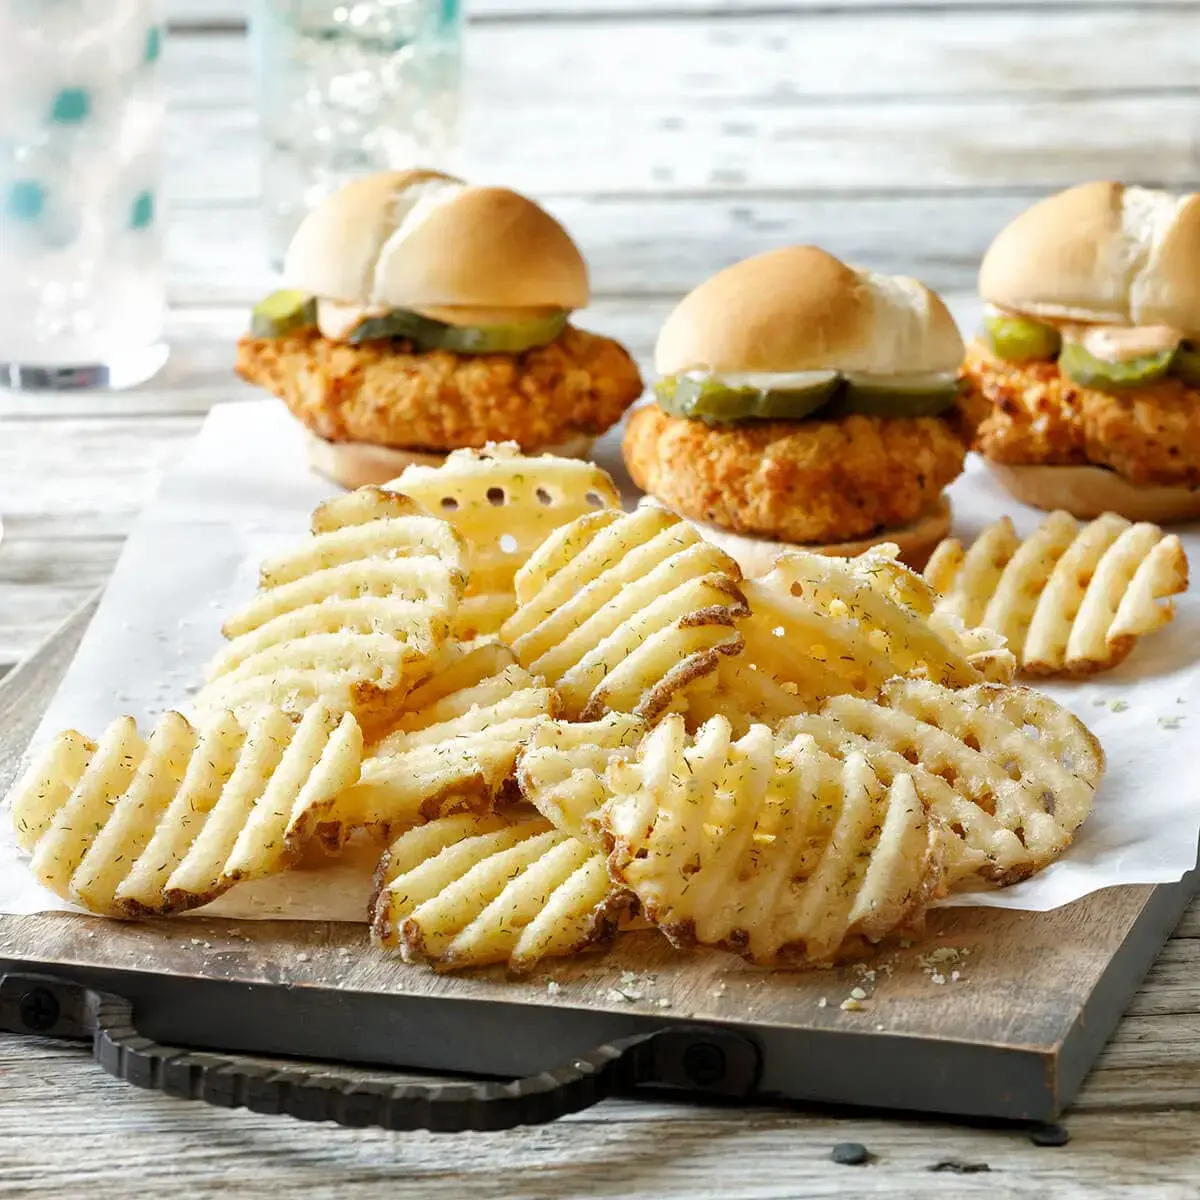 Crispy Dill Pickle Fries with Fried Chicken Sliders Recipe Card